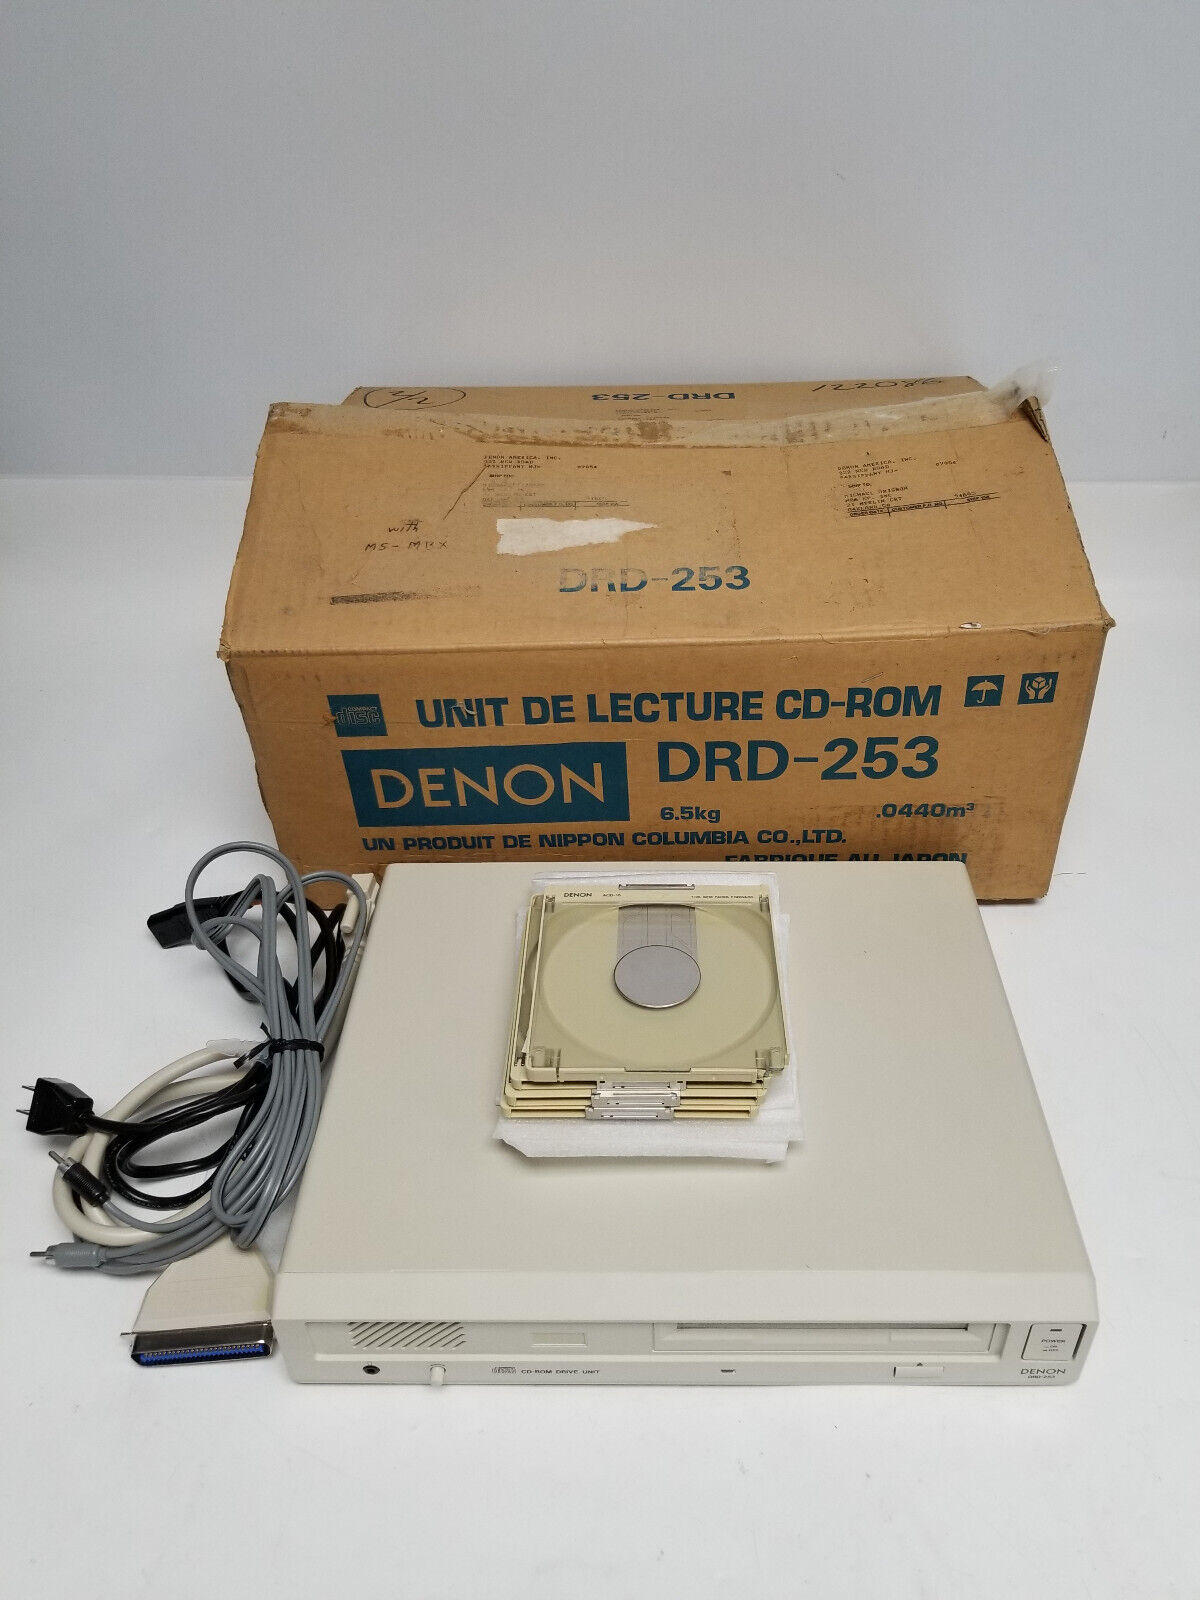 Vintage 1989 Denon DRD-253 Stand Alone CD-ROM Drive  (Powers On)